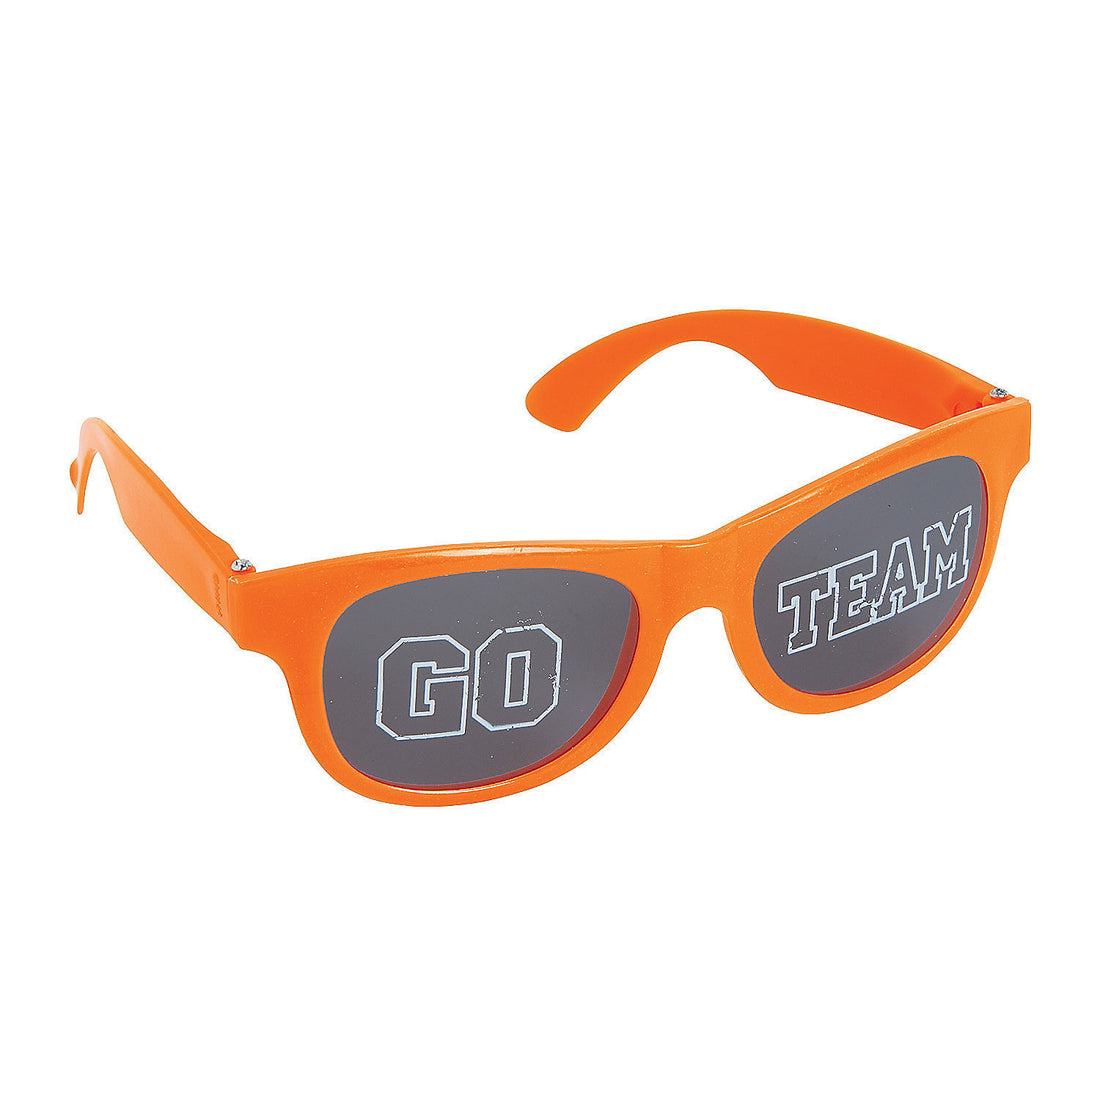 Sunglasses to support your favorite team or your mood!